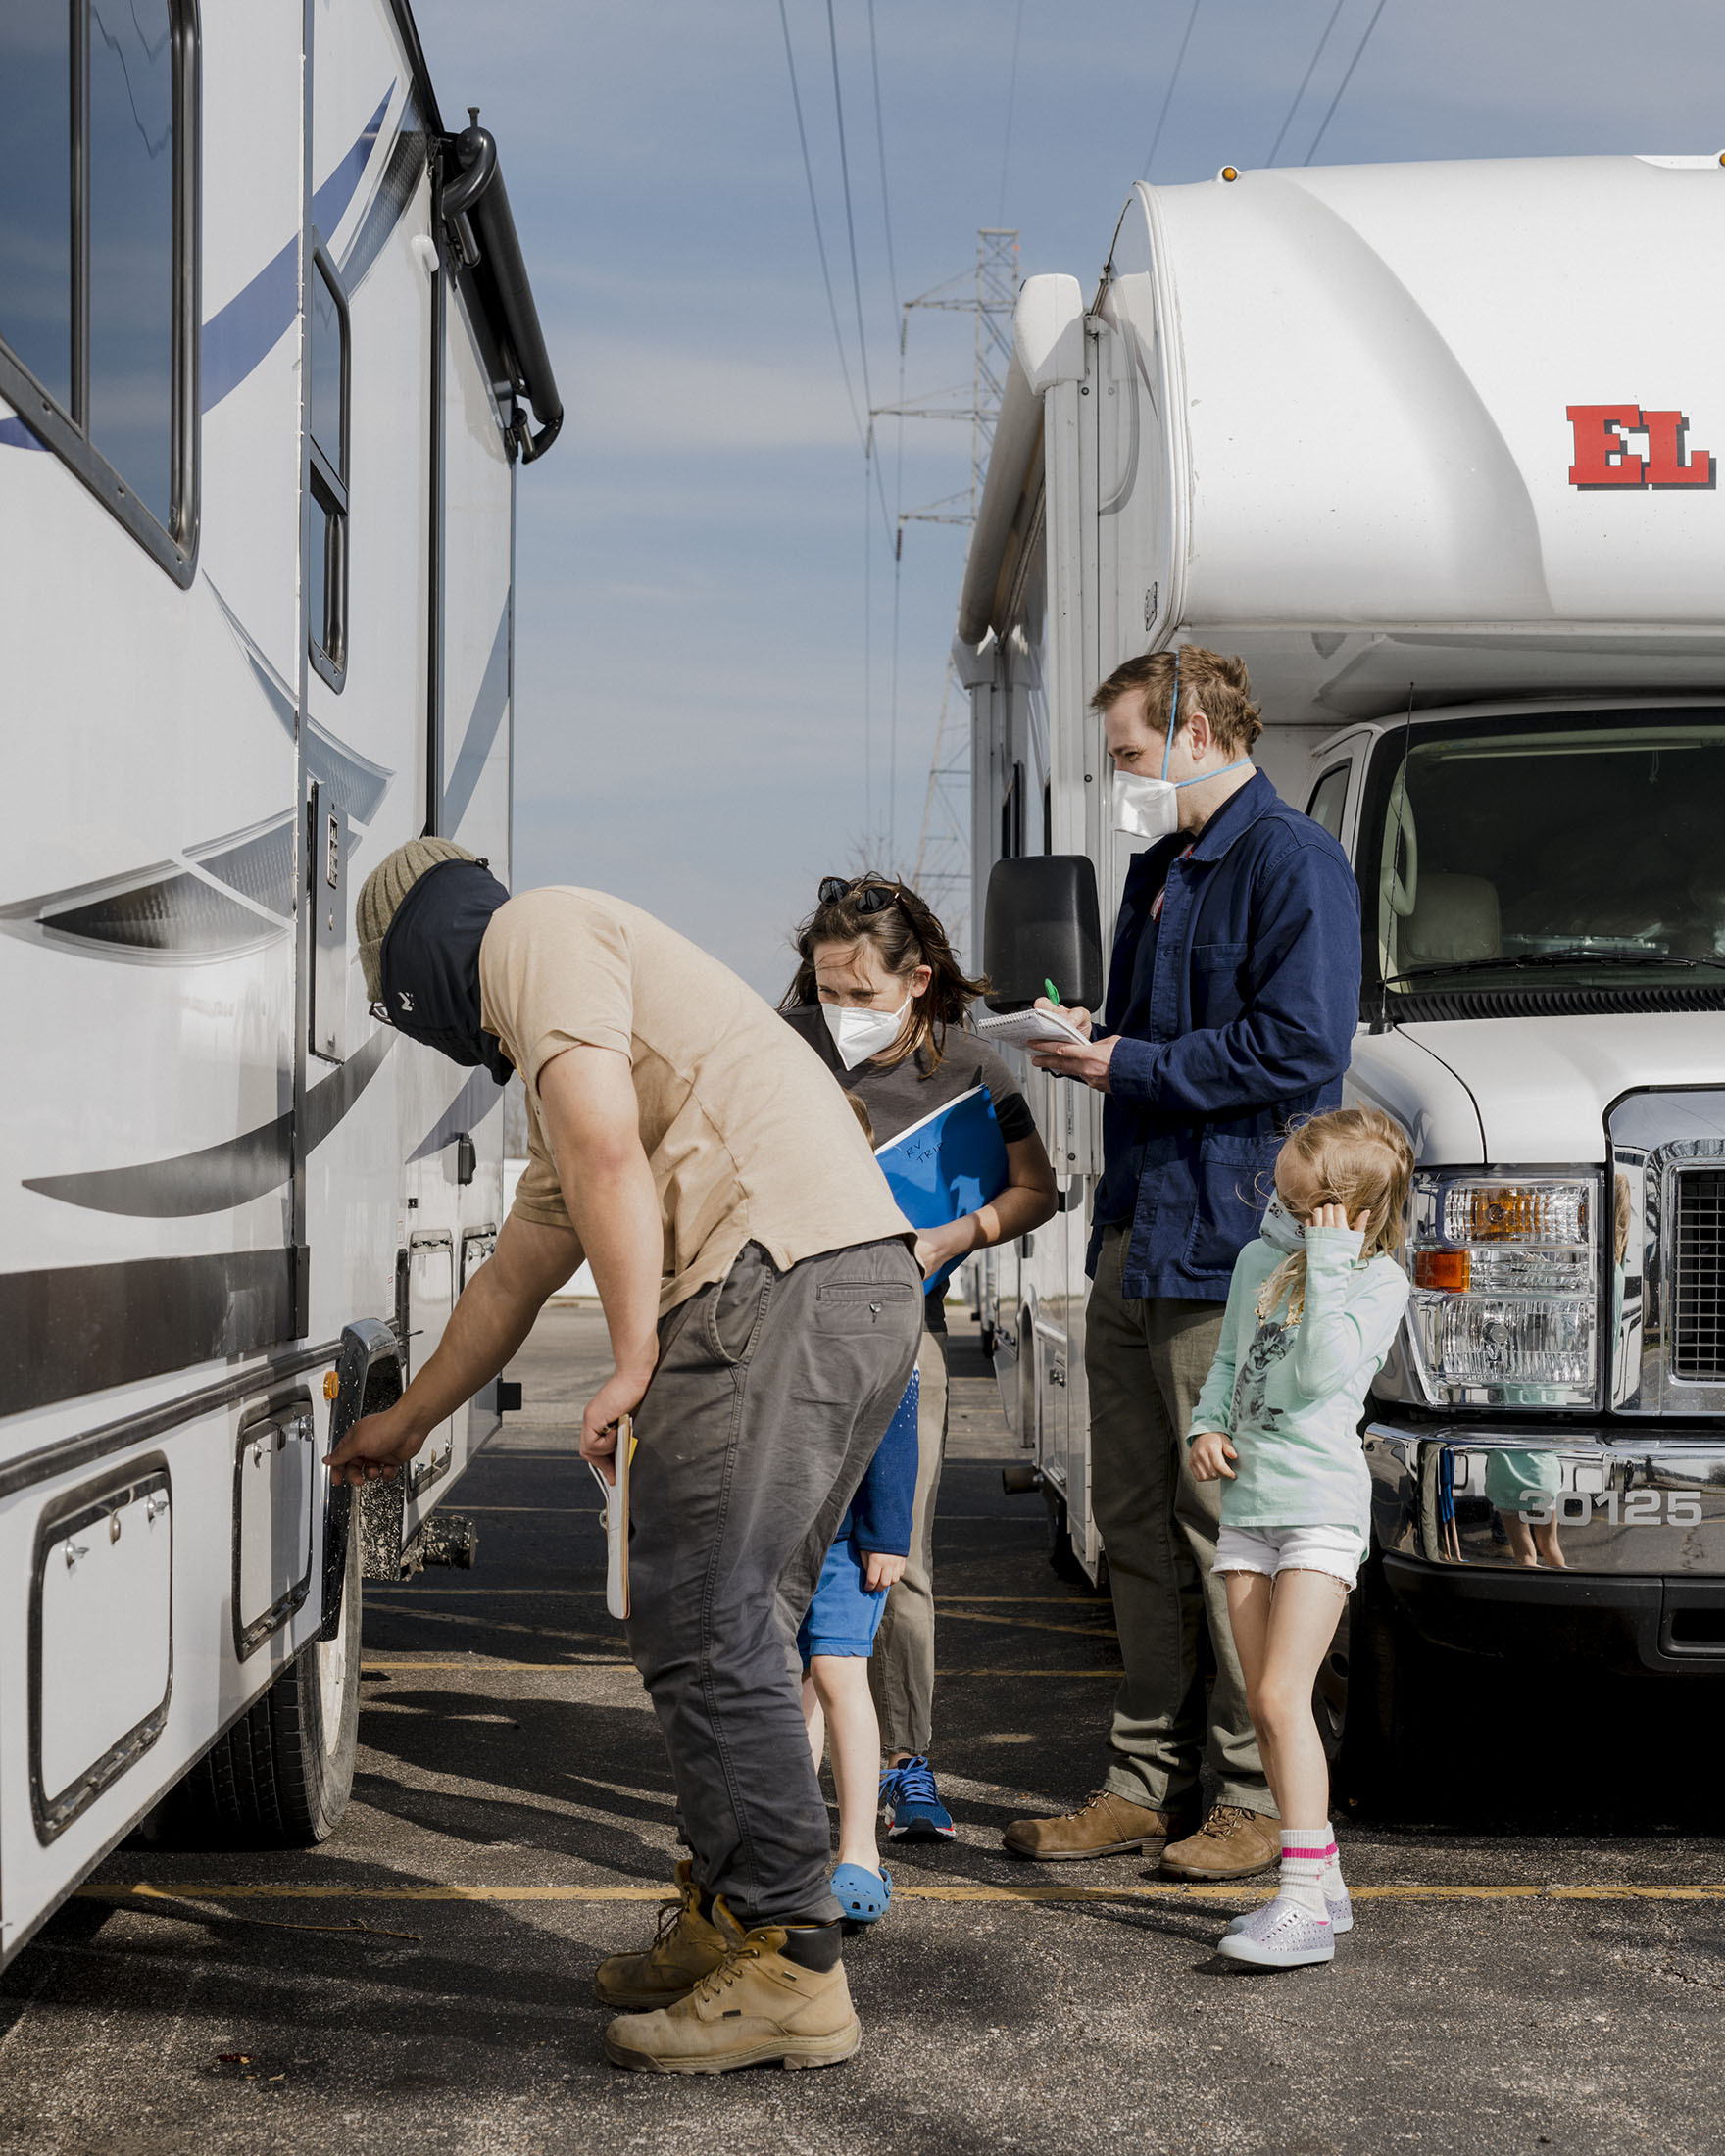 Pandemic Vacation: What We Learned Driving 1,100 Miles in an RV - Bloomberg